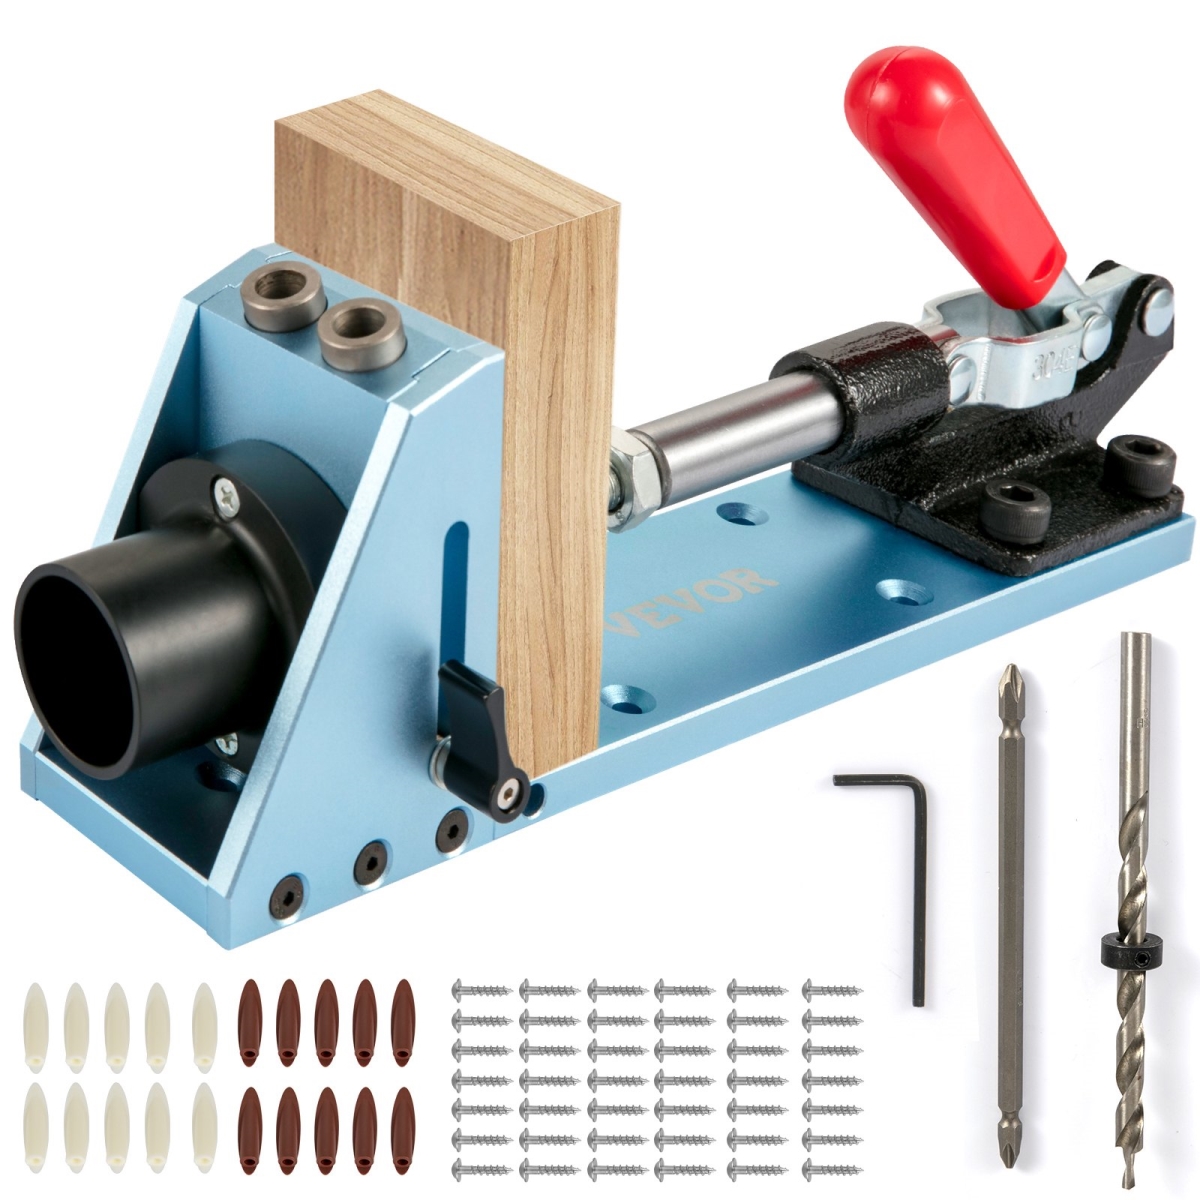 Picture of Vevor XKKJJFFFBDDWC944RV0 M4 Adjustable & Easy to Use Joinery Woodworking System Pocket Hole Jig Kit